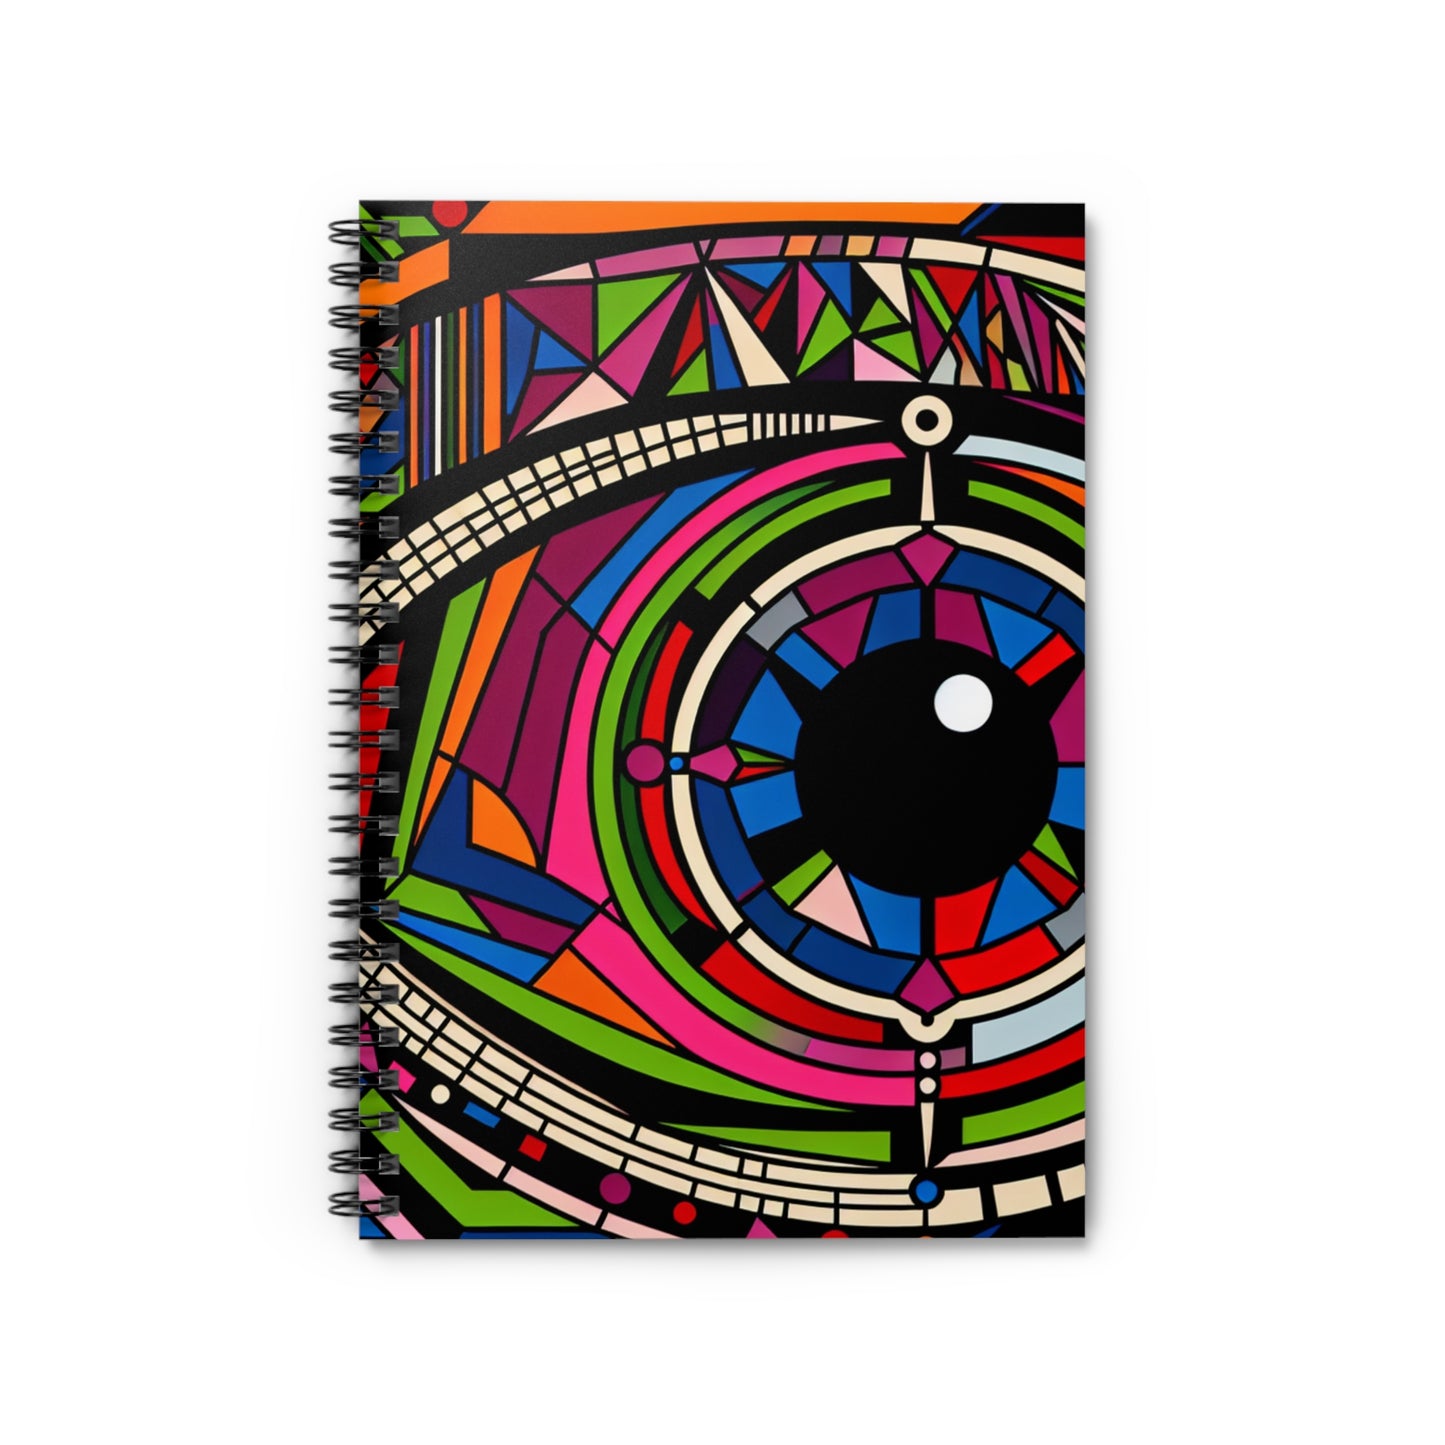 "Eye of the Illusionist". - The Alien Spiral Notebook (Ruled Line) Op Art Style